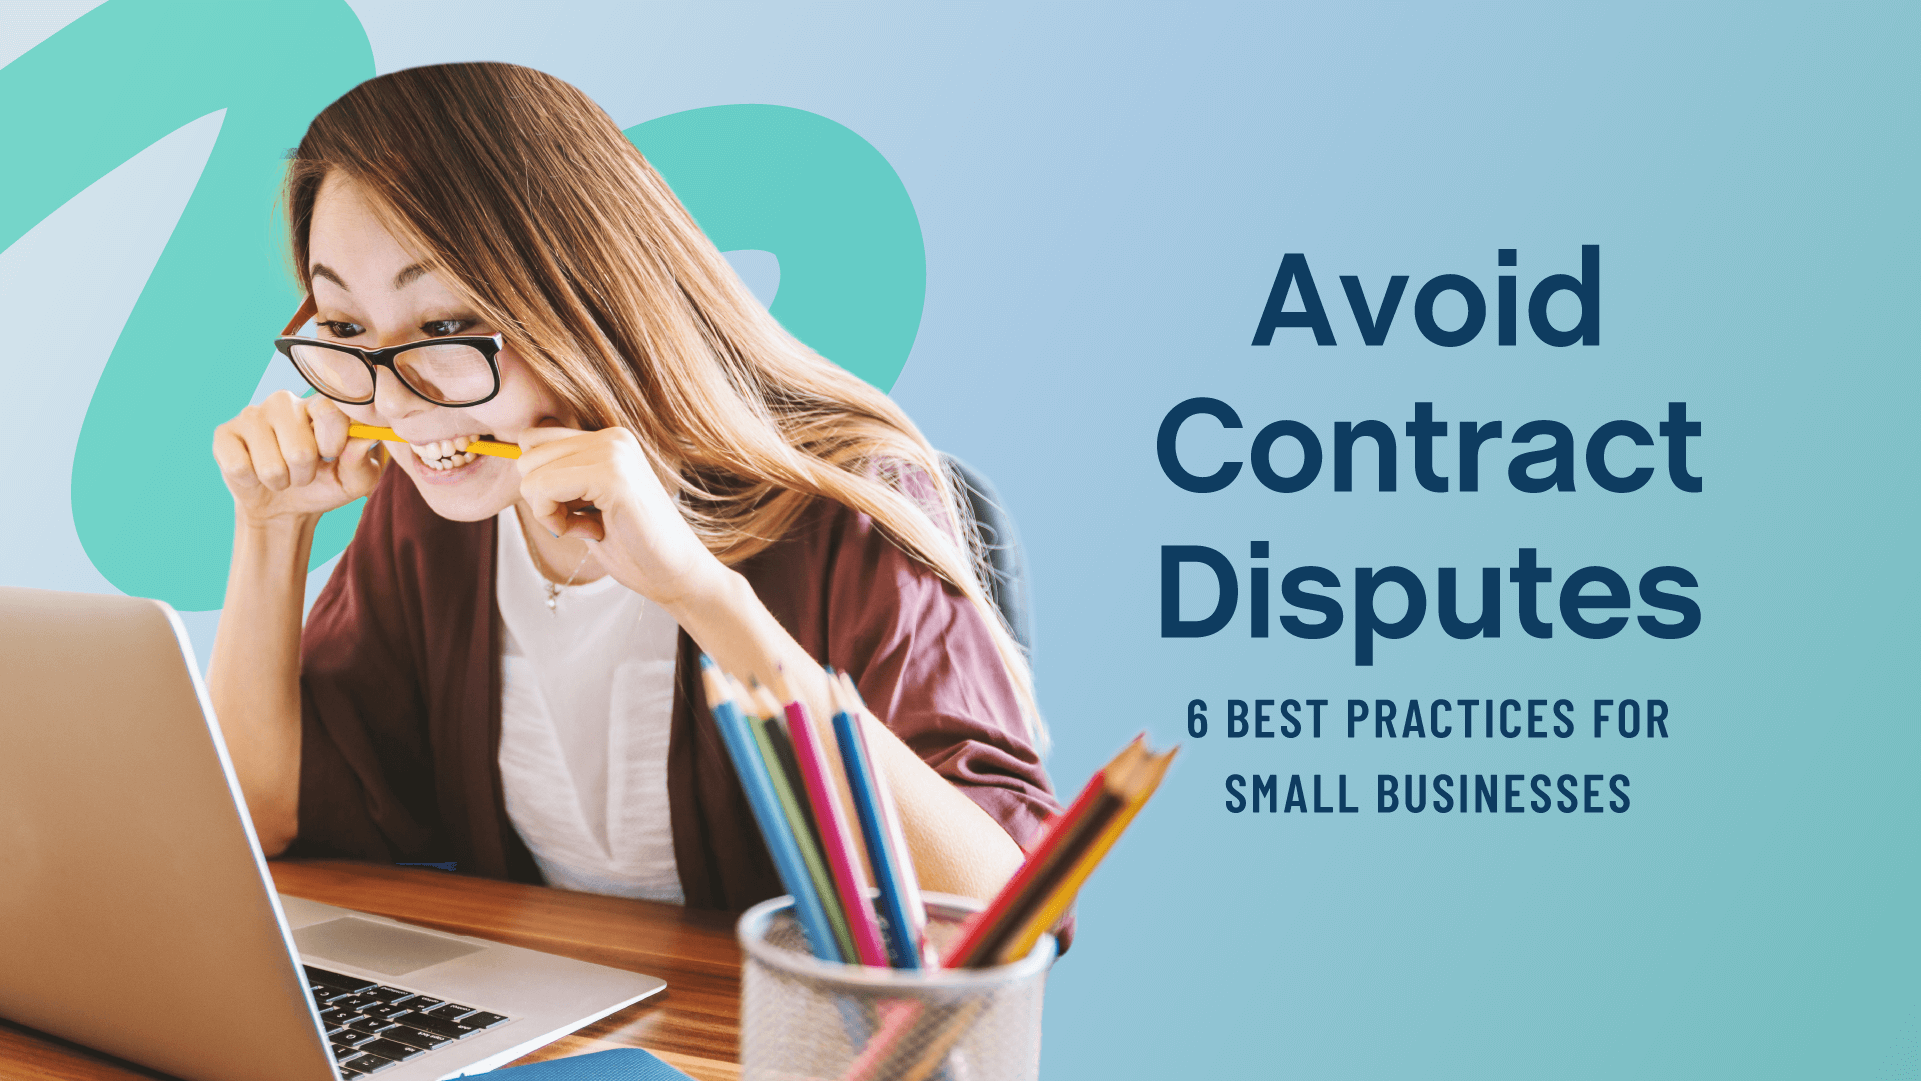 Avoid Contract Disputes: 6 Best Practices for Small Businesses